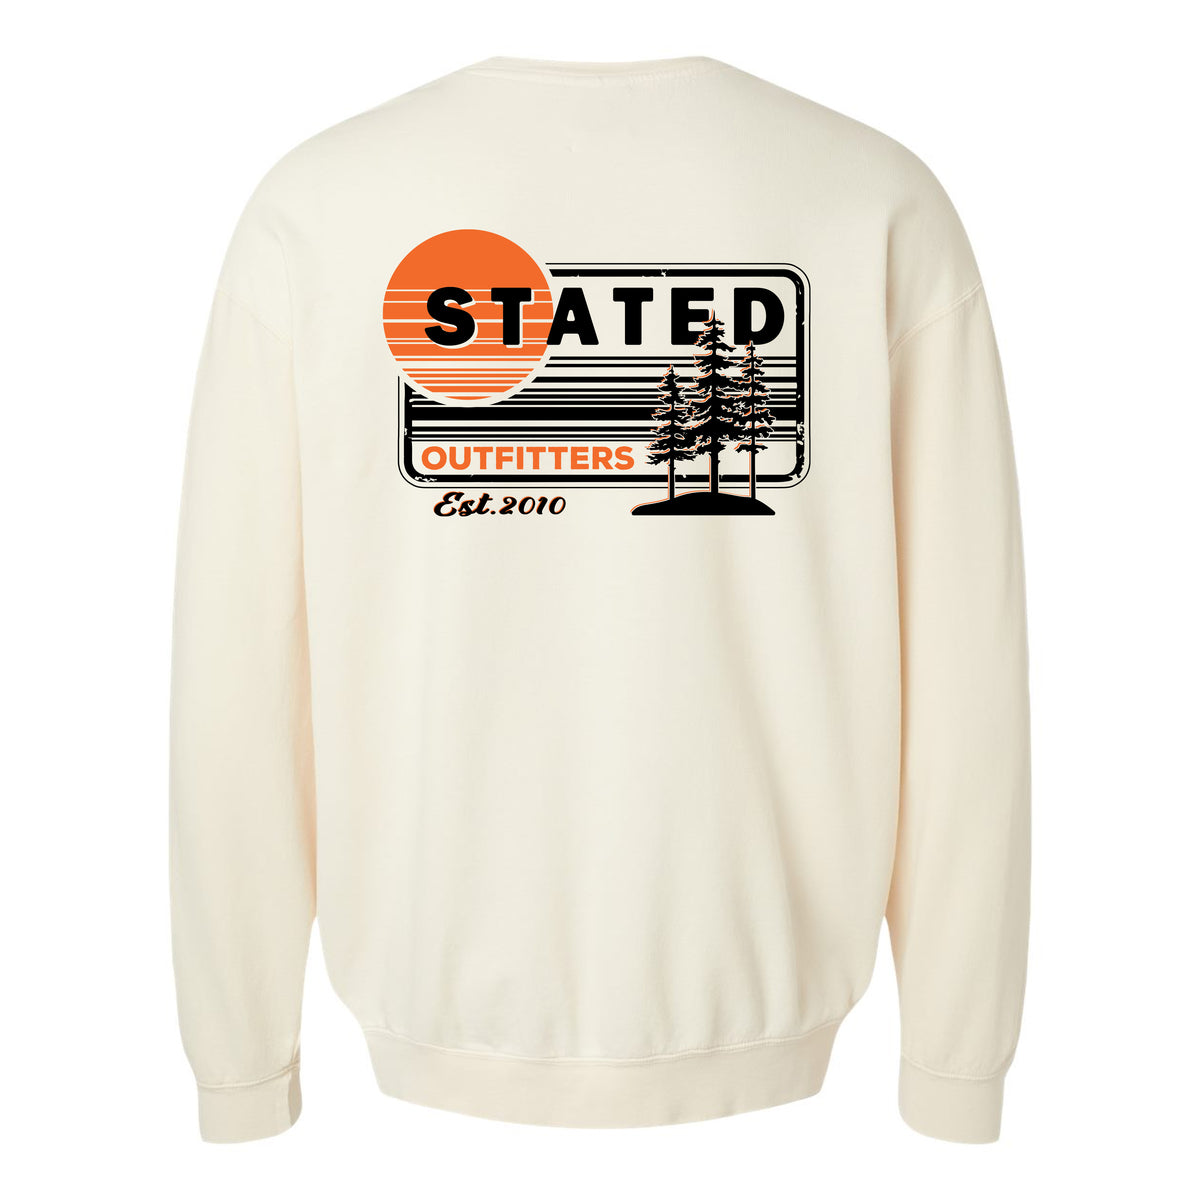 Stated Outfitters License Plate Sweatshirt